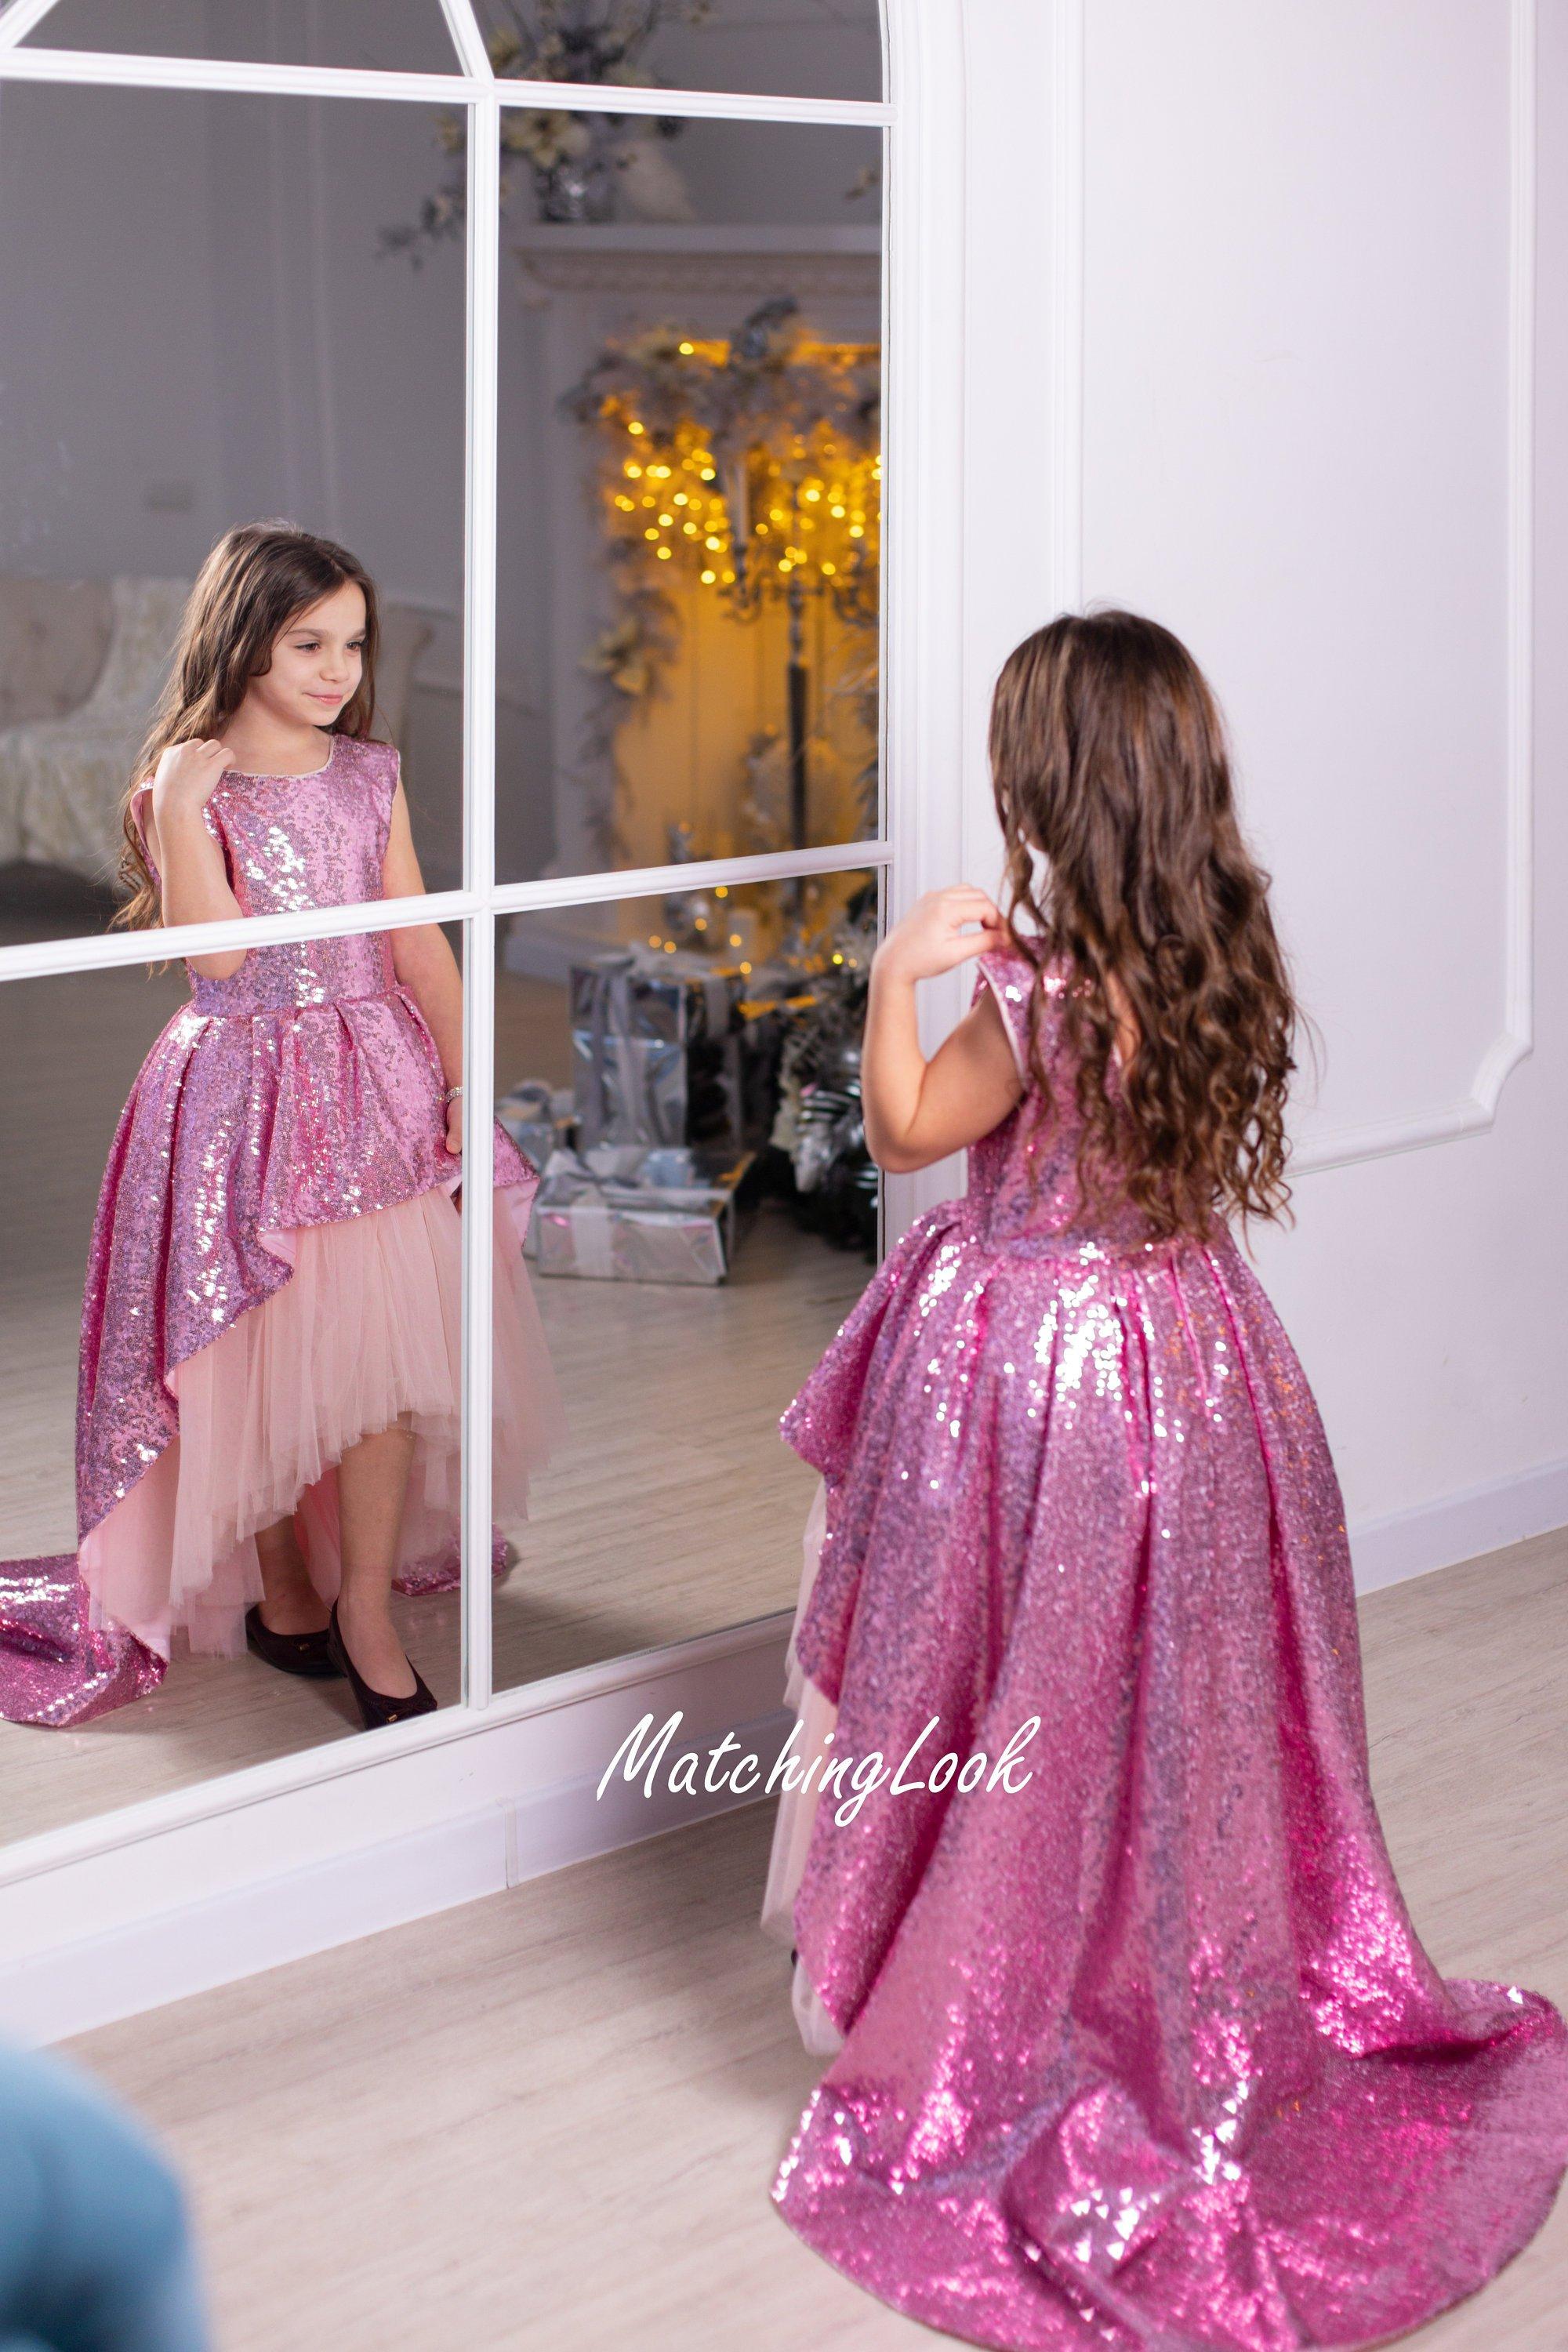 $33.89 Beautiful Pink Princess High Low Party Dress For Girls 10